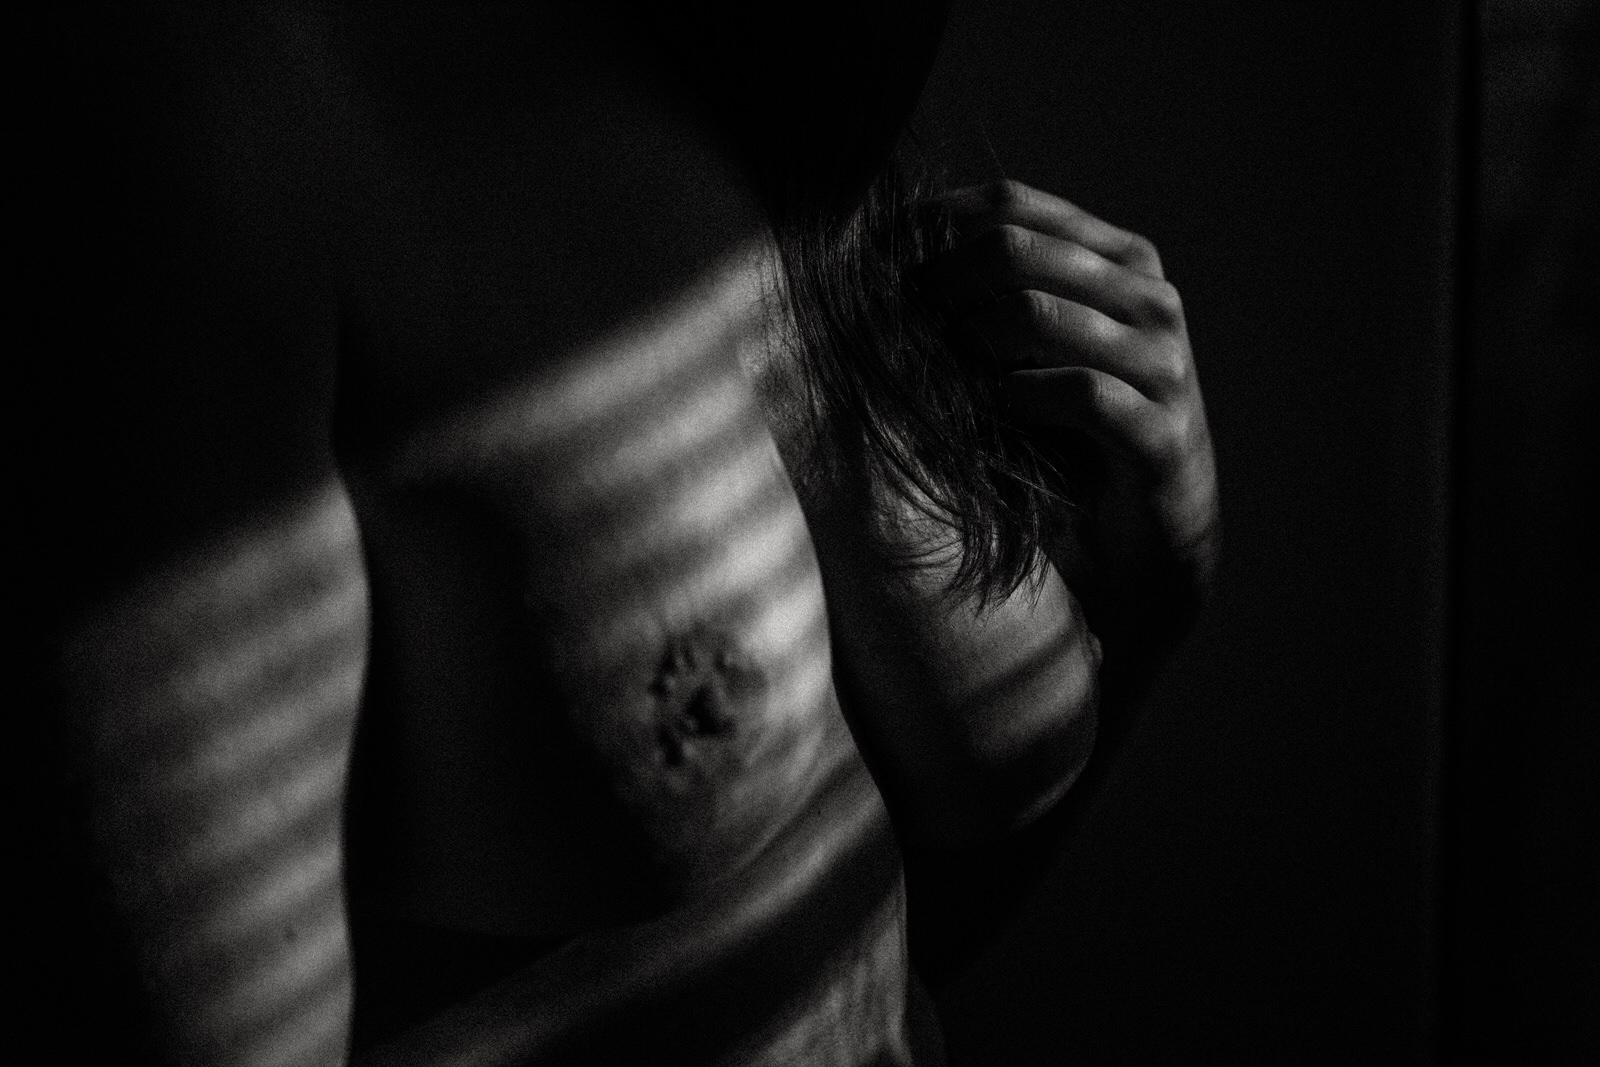 fine art nude photo of breasts with stripe shadow